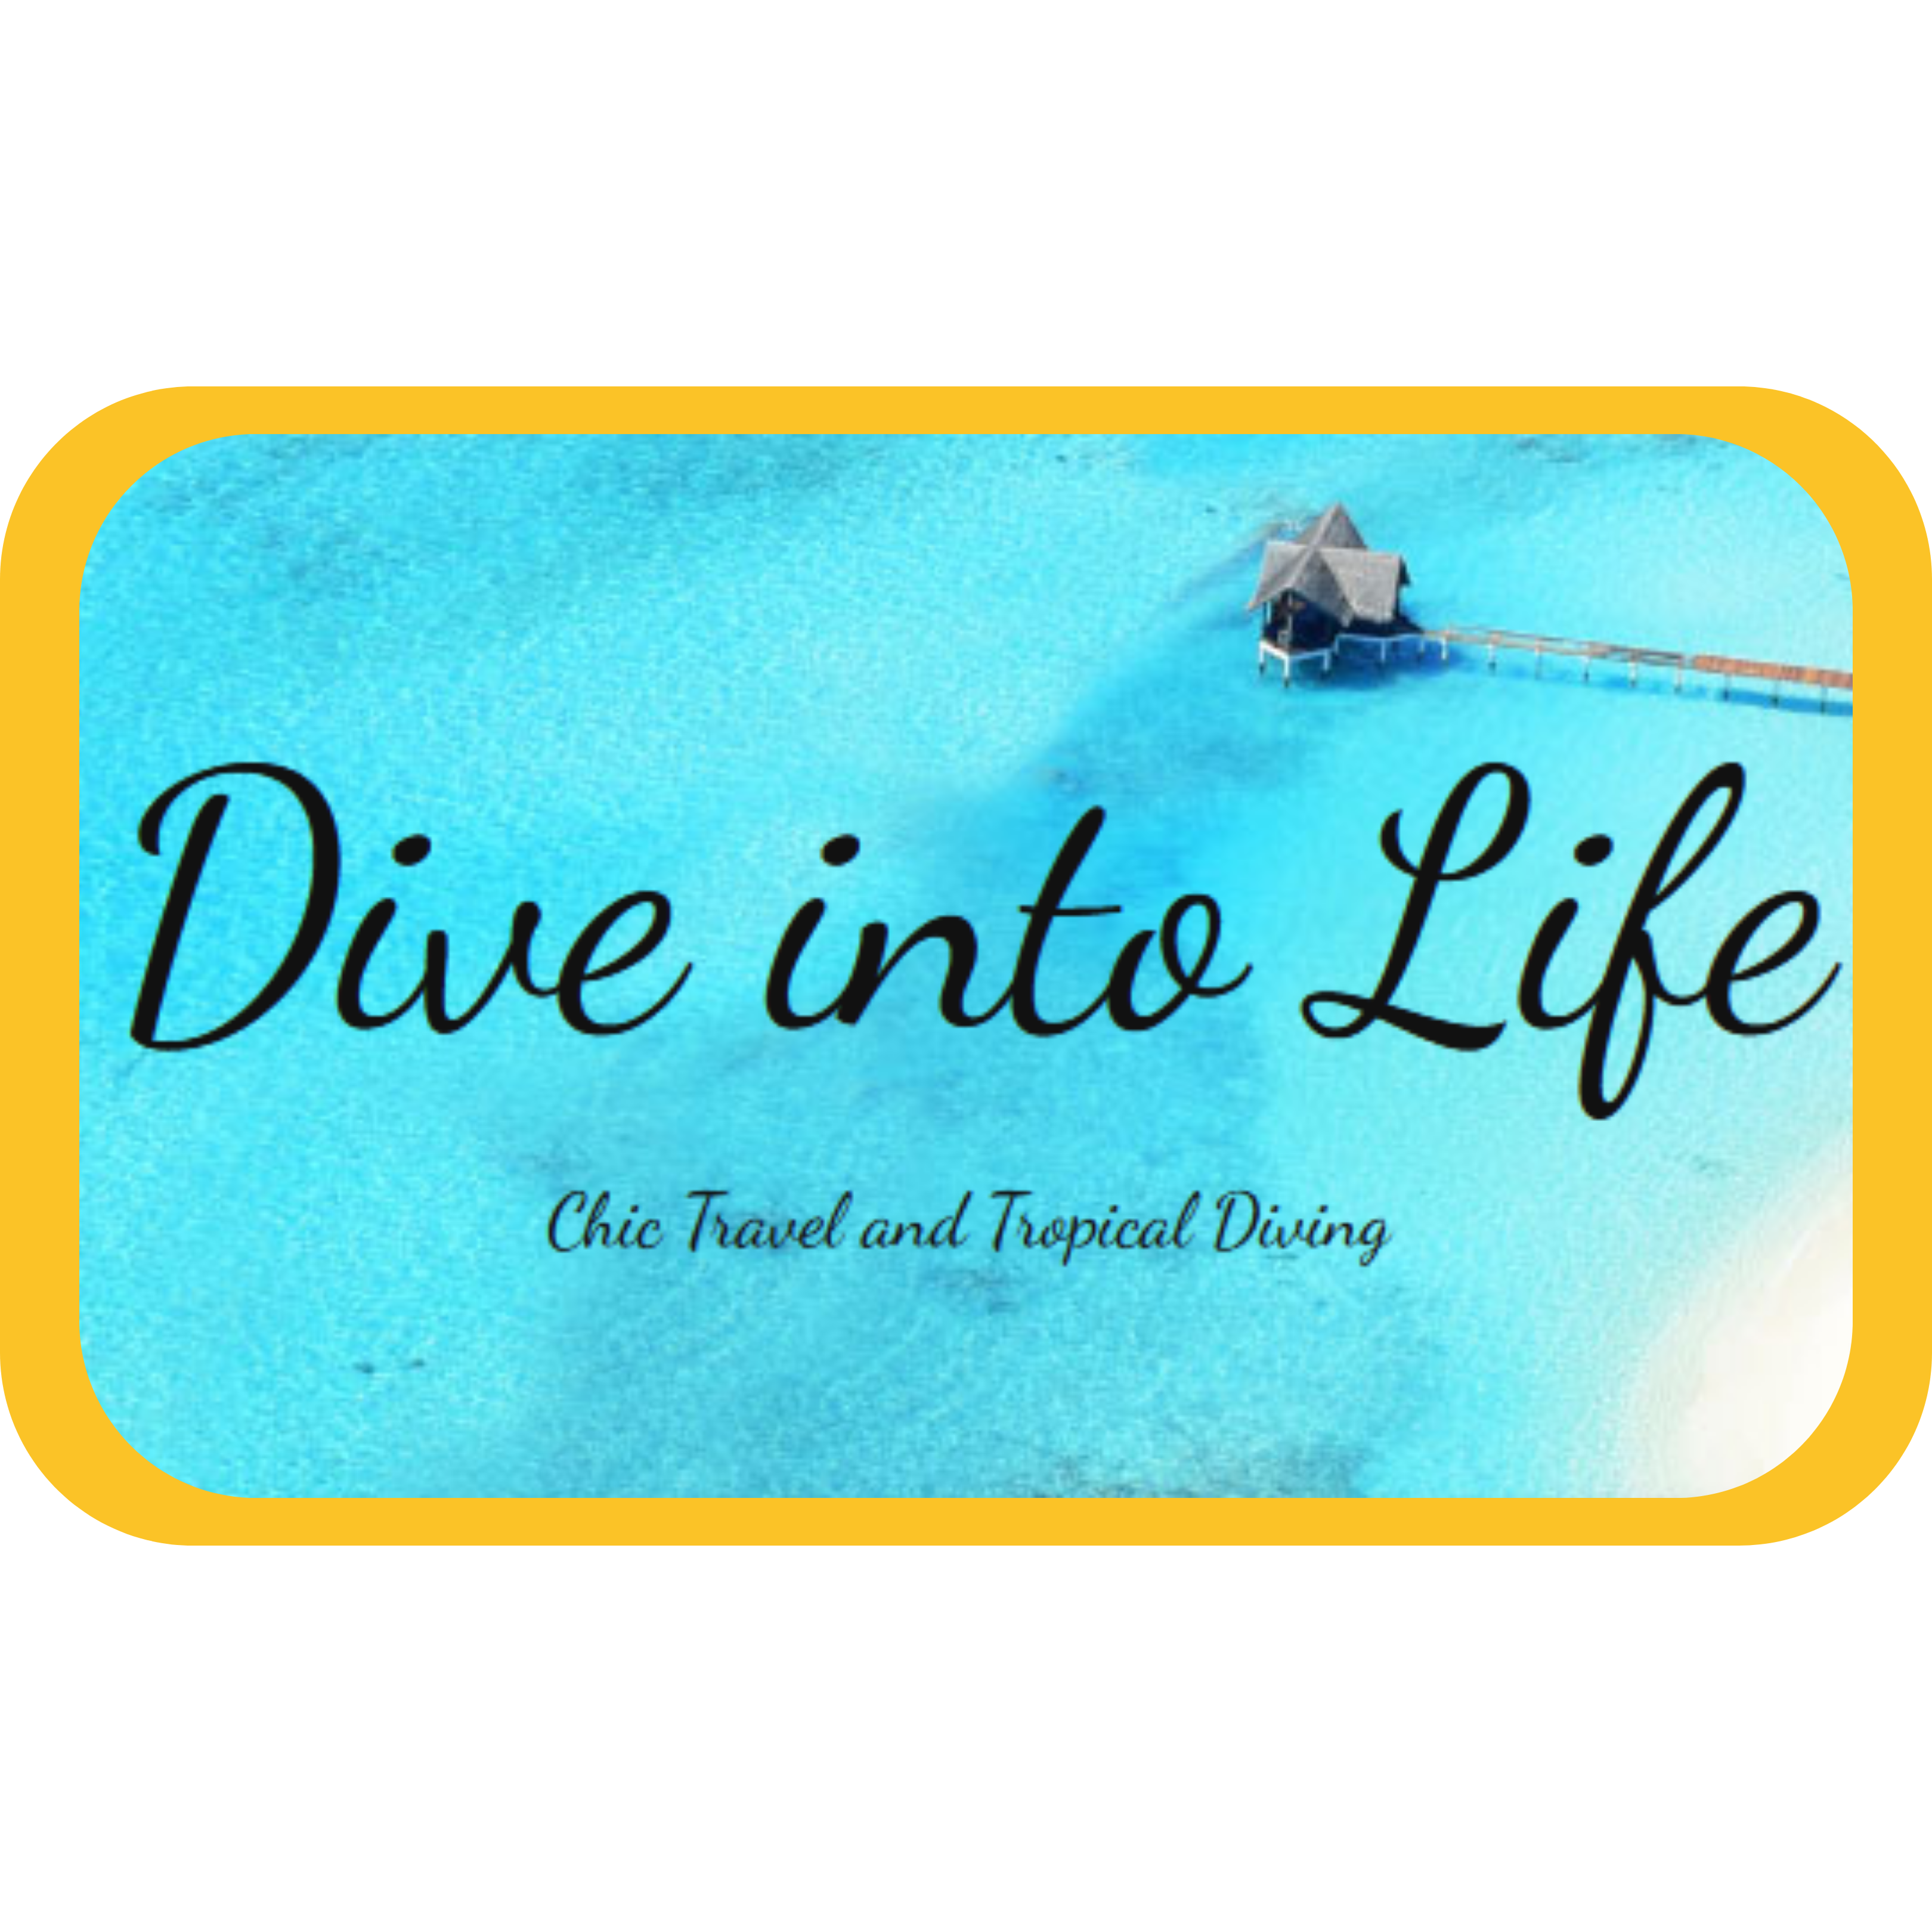 Dive into life